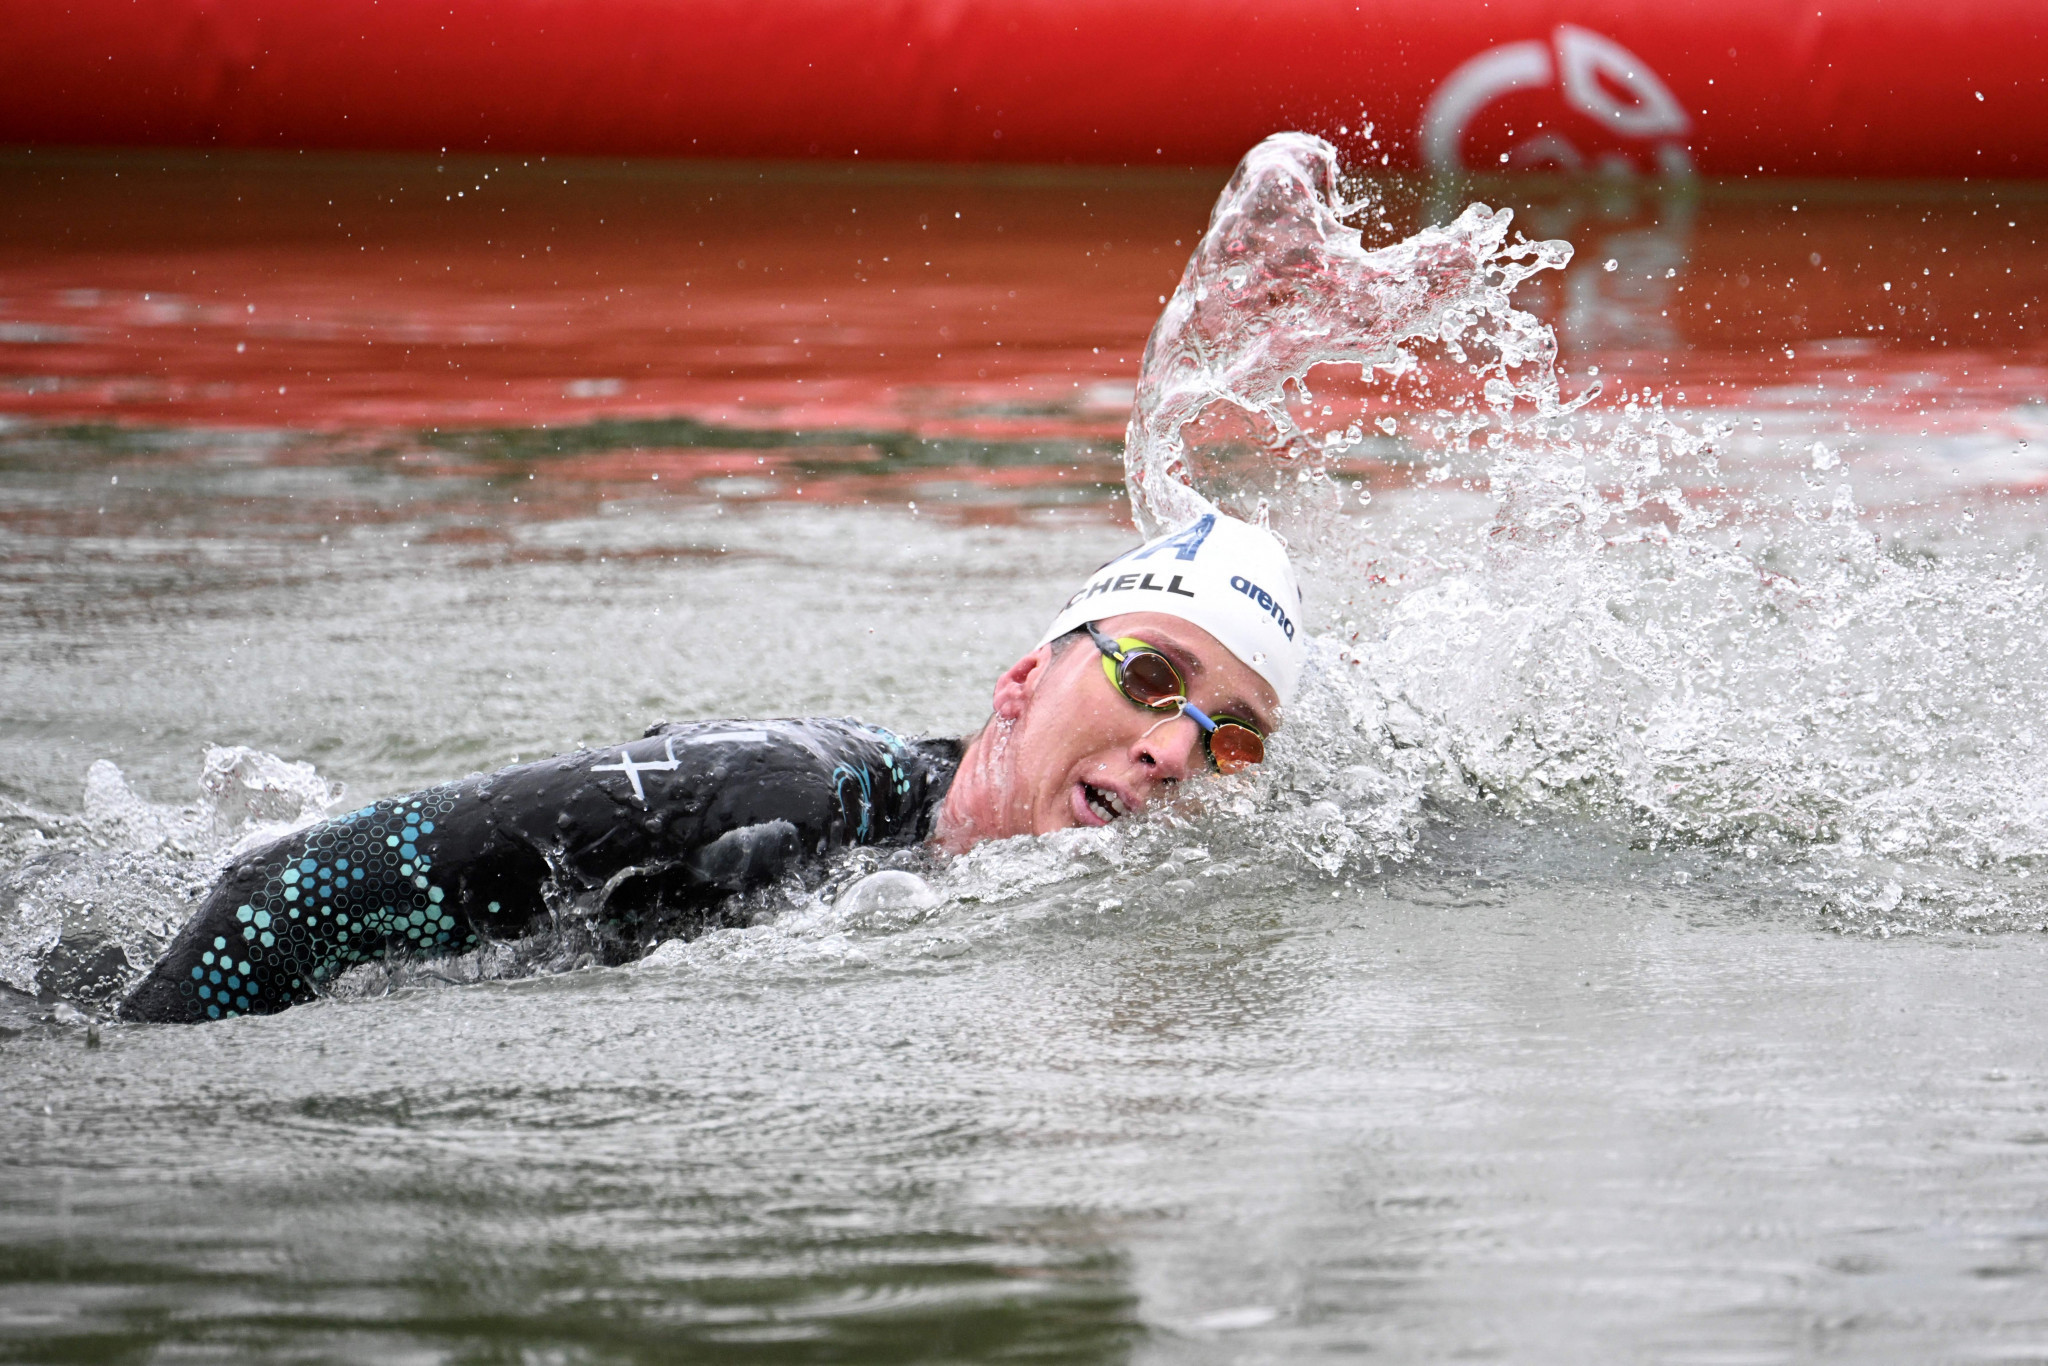 Ashley Twichell claimed an impressive victory for the US in the women's 10km open water swimming race ©Getty Images